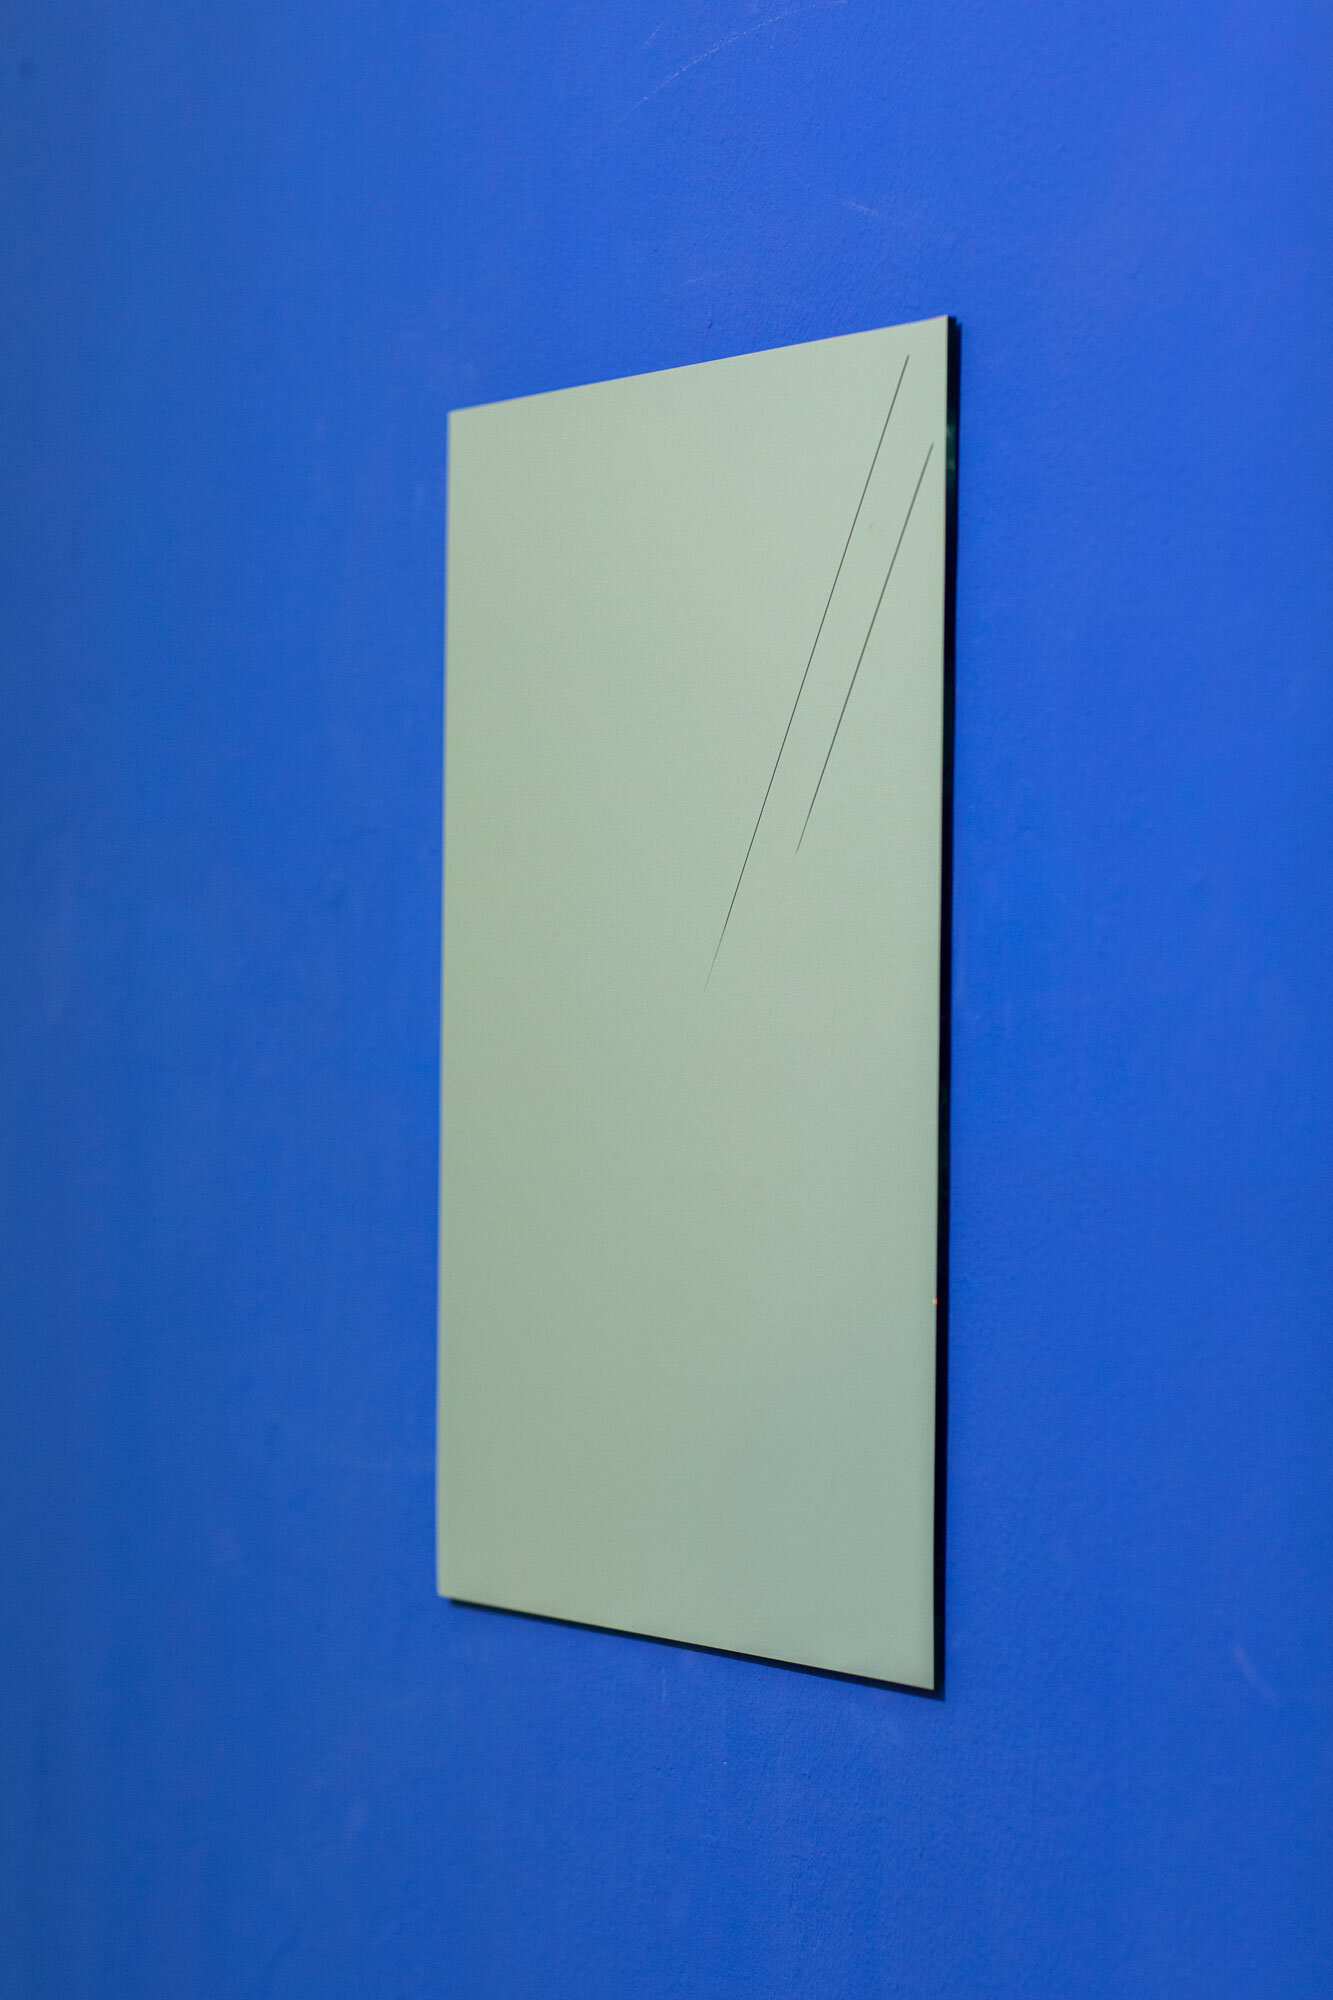  The illusion in the mirror makes me hardly see the mirror, stage; performance; mask; mirror; wall painting, dimensions variable, Installation view (part), 2020 